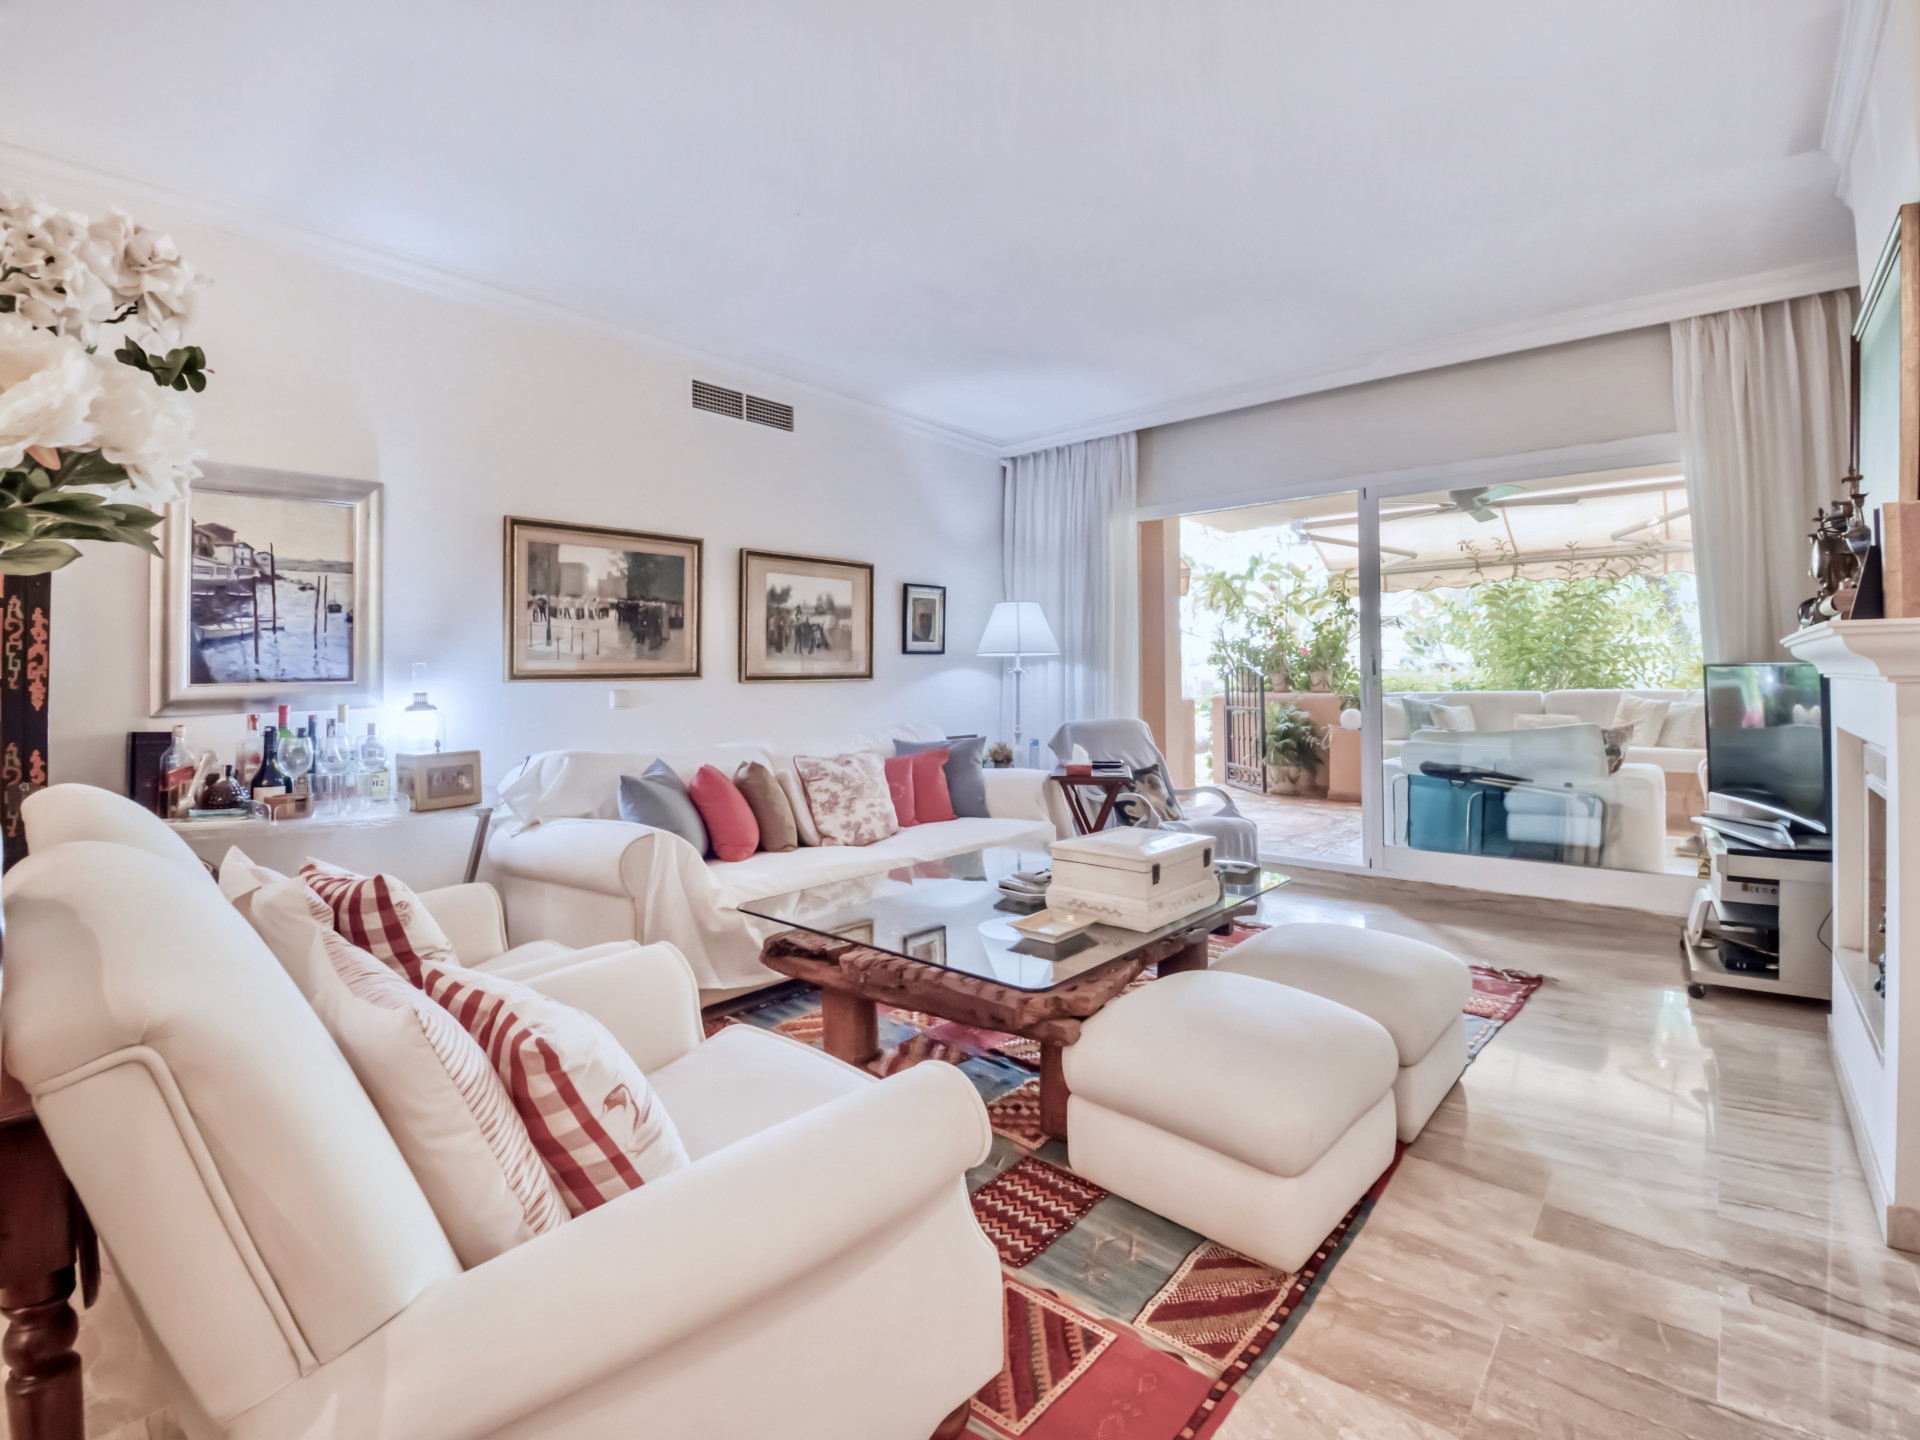 Ground floor apartment situated in a gated complex in Guadalmina Baja with direct access to the communal gardens and pool